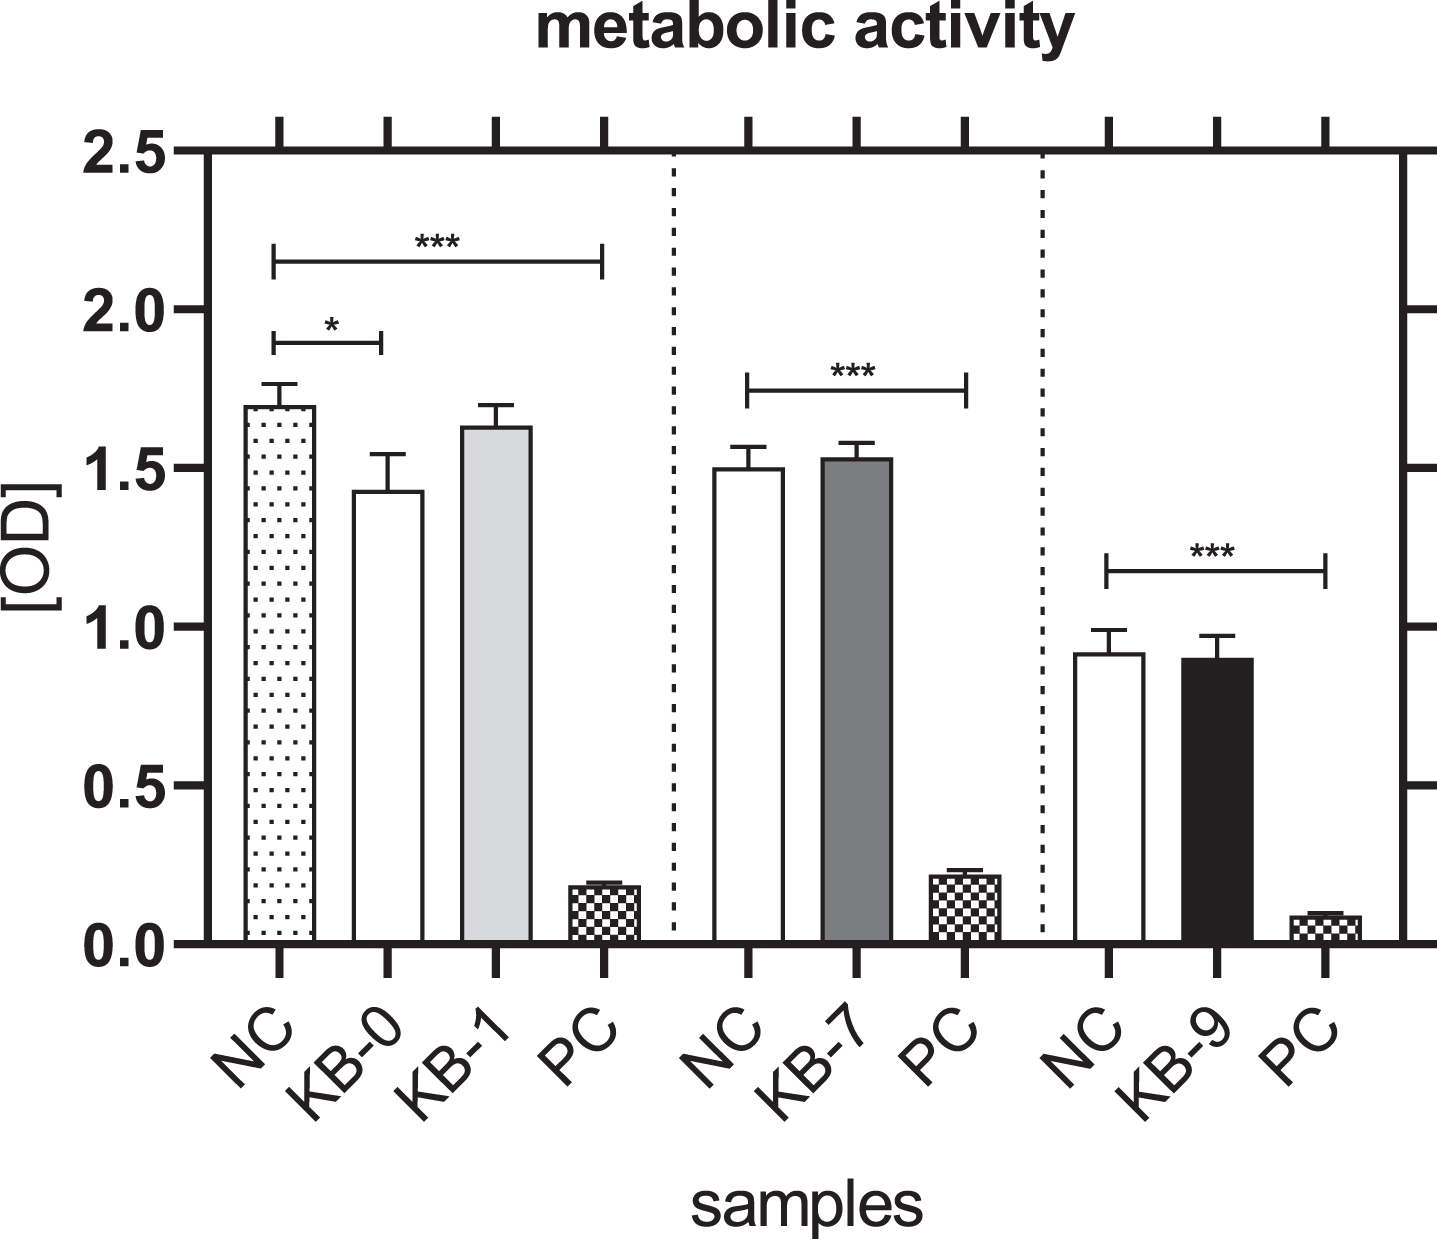 Metabolic activity of L929 cells after 48 h of eluate incubation with KB-0, KB-1, KB-7 and KB-9 measured in three independent studies. L929 cell cultivated with pure medium (NC) were used as negative control (NC). Cells cultivated in TCP and treated with cell lysis buffer were used as positive control (PC). Presented are arithmetic mean±standard deviation of n = 8 samples. p < 0.05 was considered significant compared to NC. *: p < 0.05; **: p < 0.01, ***: p < 0.001.